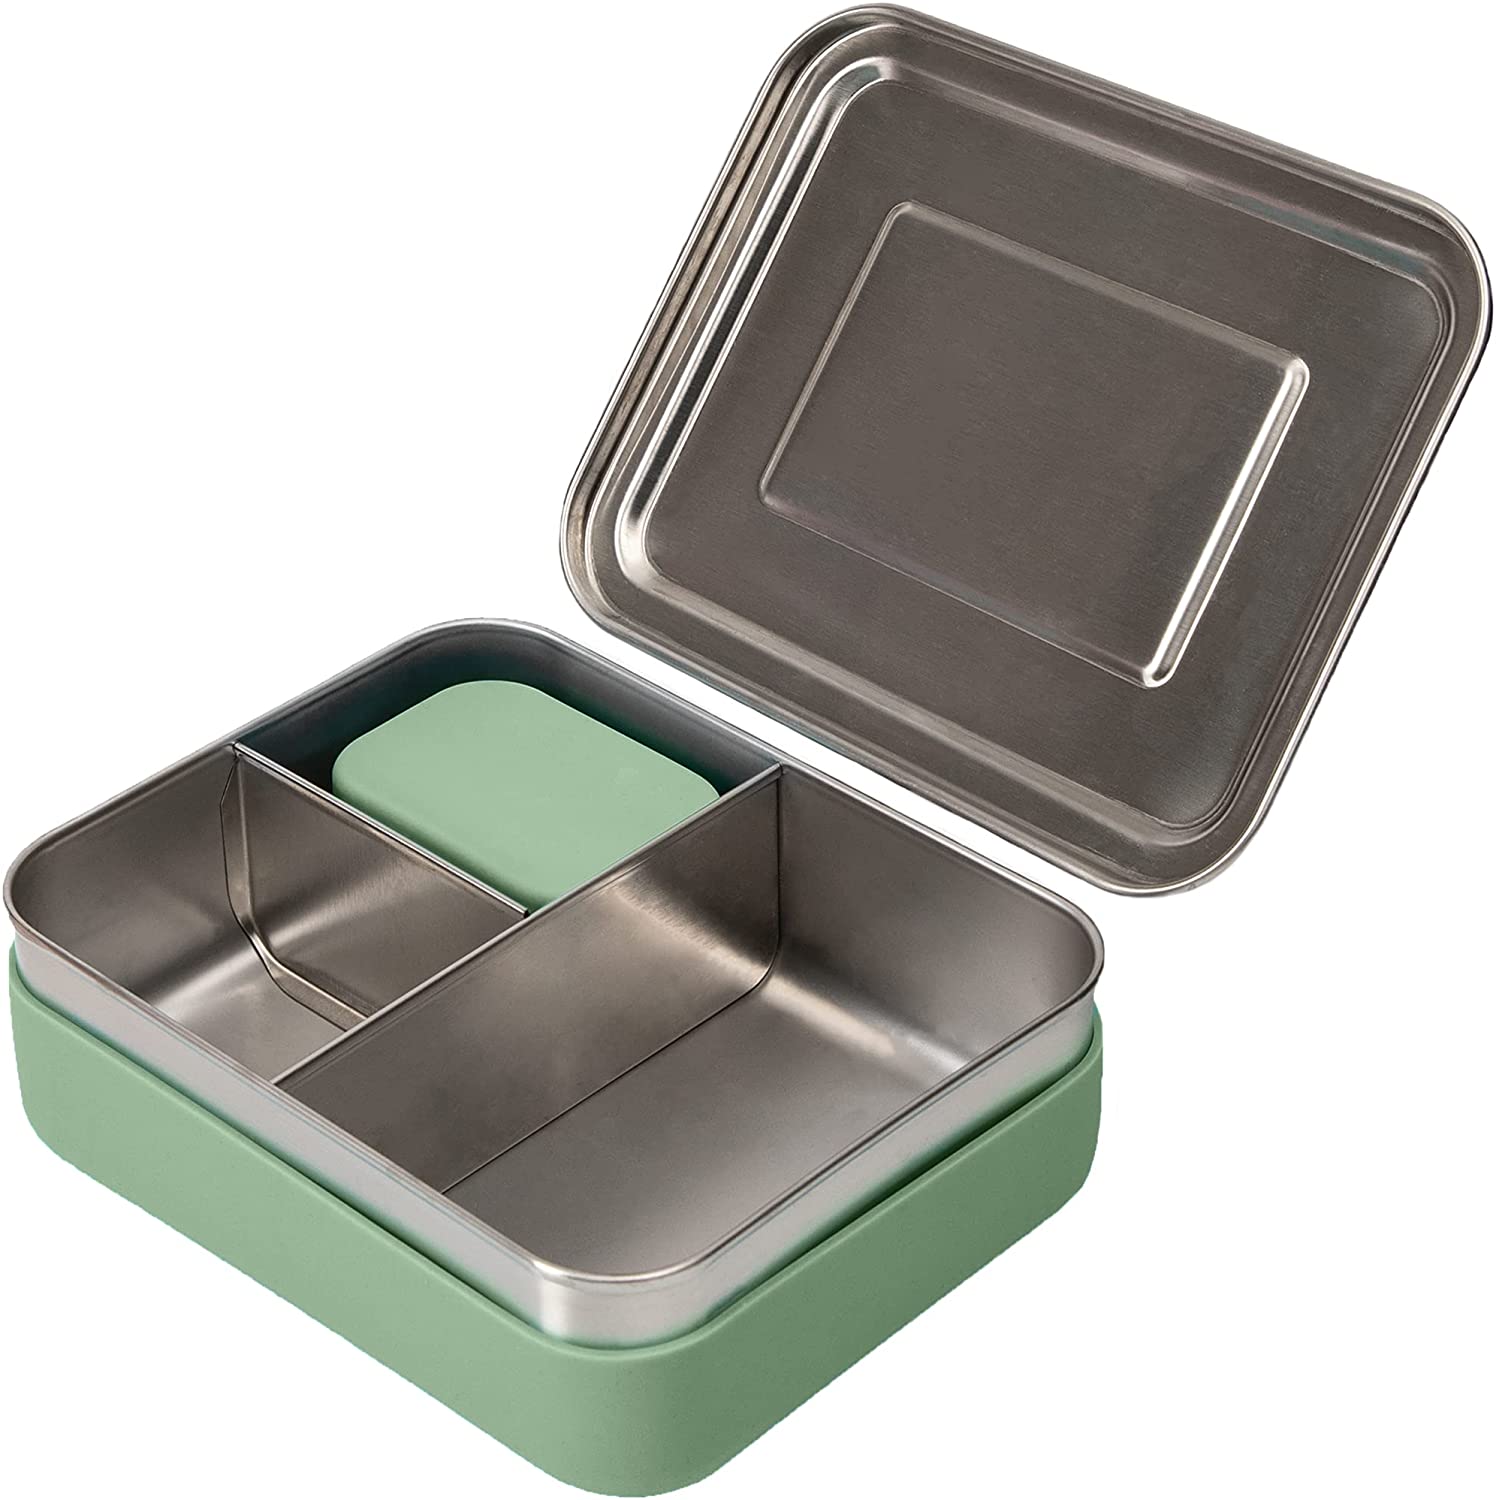 Silicone Bento Lunch Box- 3 Leakproof Compartments- Khaki